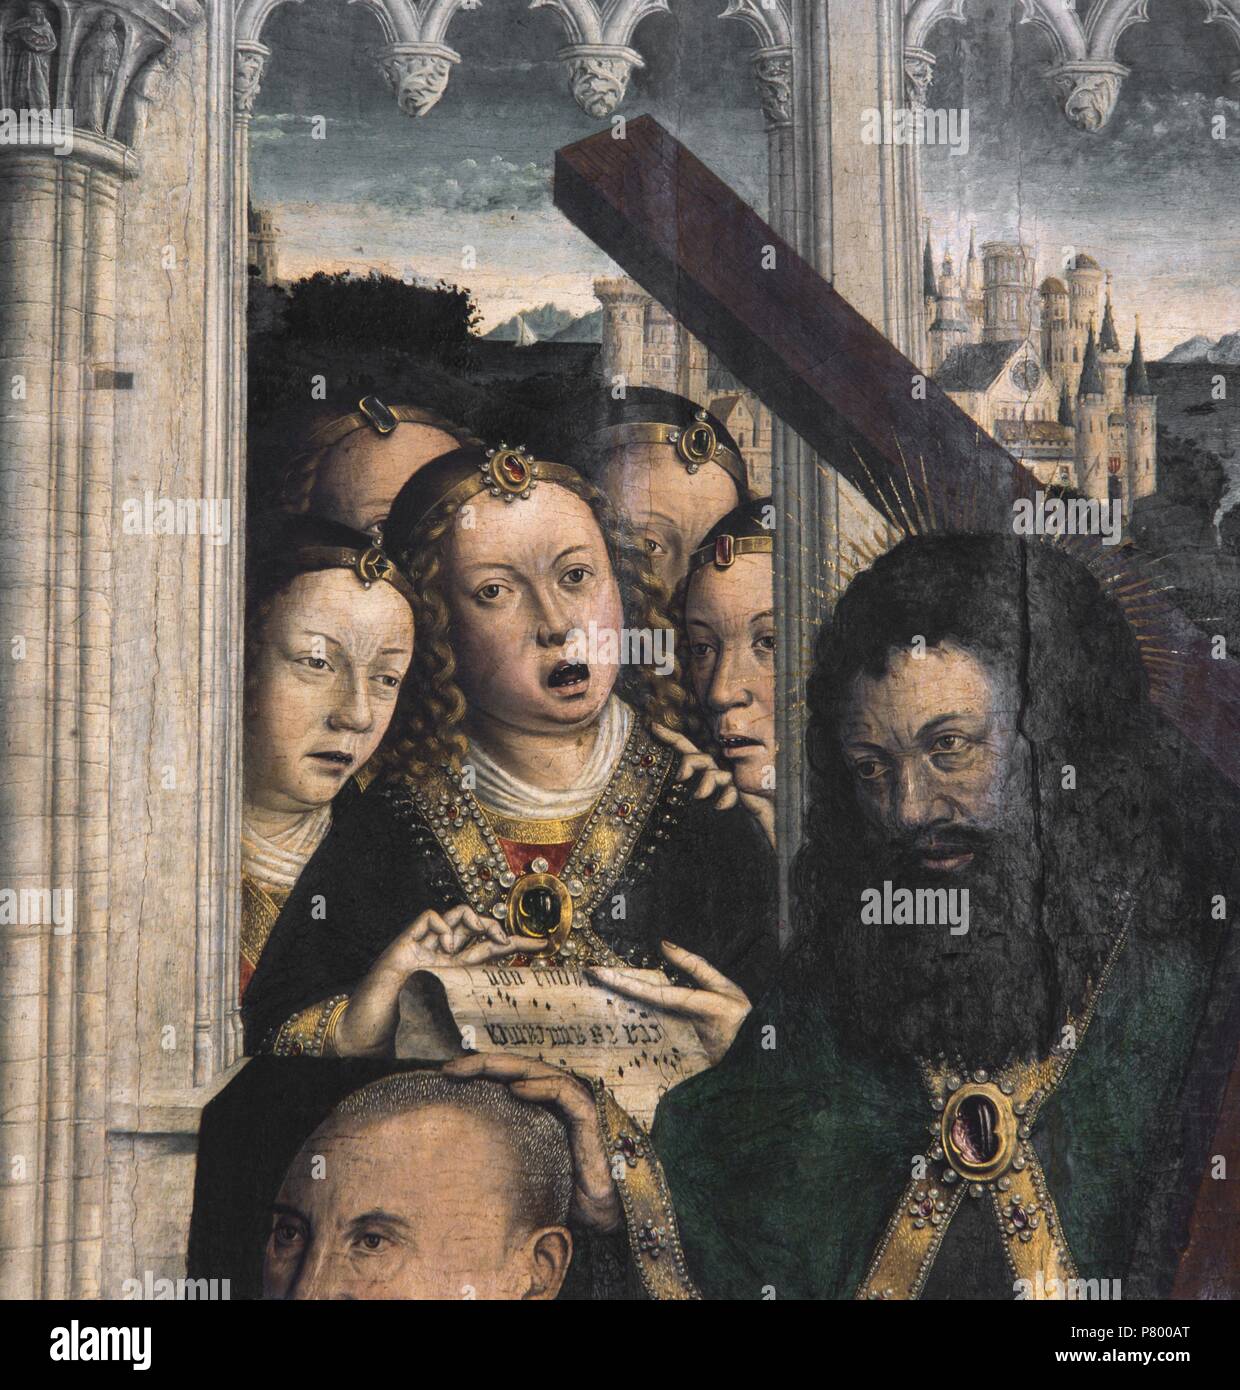 Virgin of the Consellers, 1443-1445. Detail singing angels. Oil on oak wood. 316 x 312,5 x 32,5 cm. From the altar of the chapel of Barcelona City Hall. Museu Nacional d'Art de Catalunya, Barcelona. Stock Photo